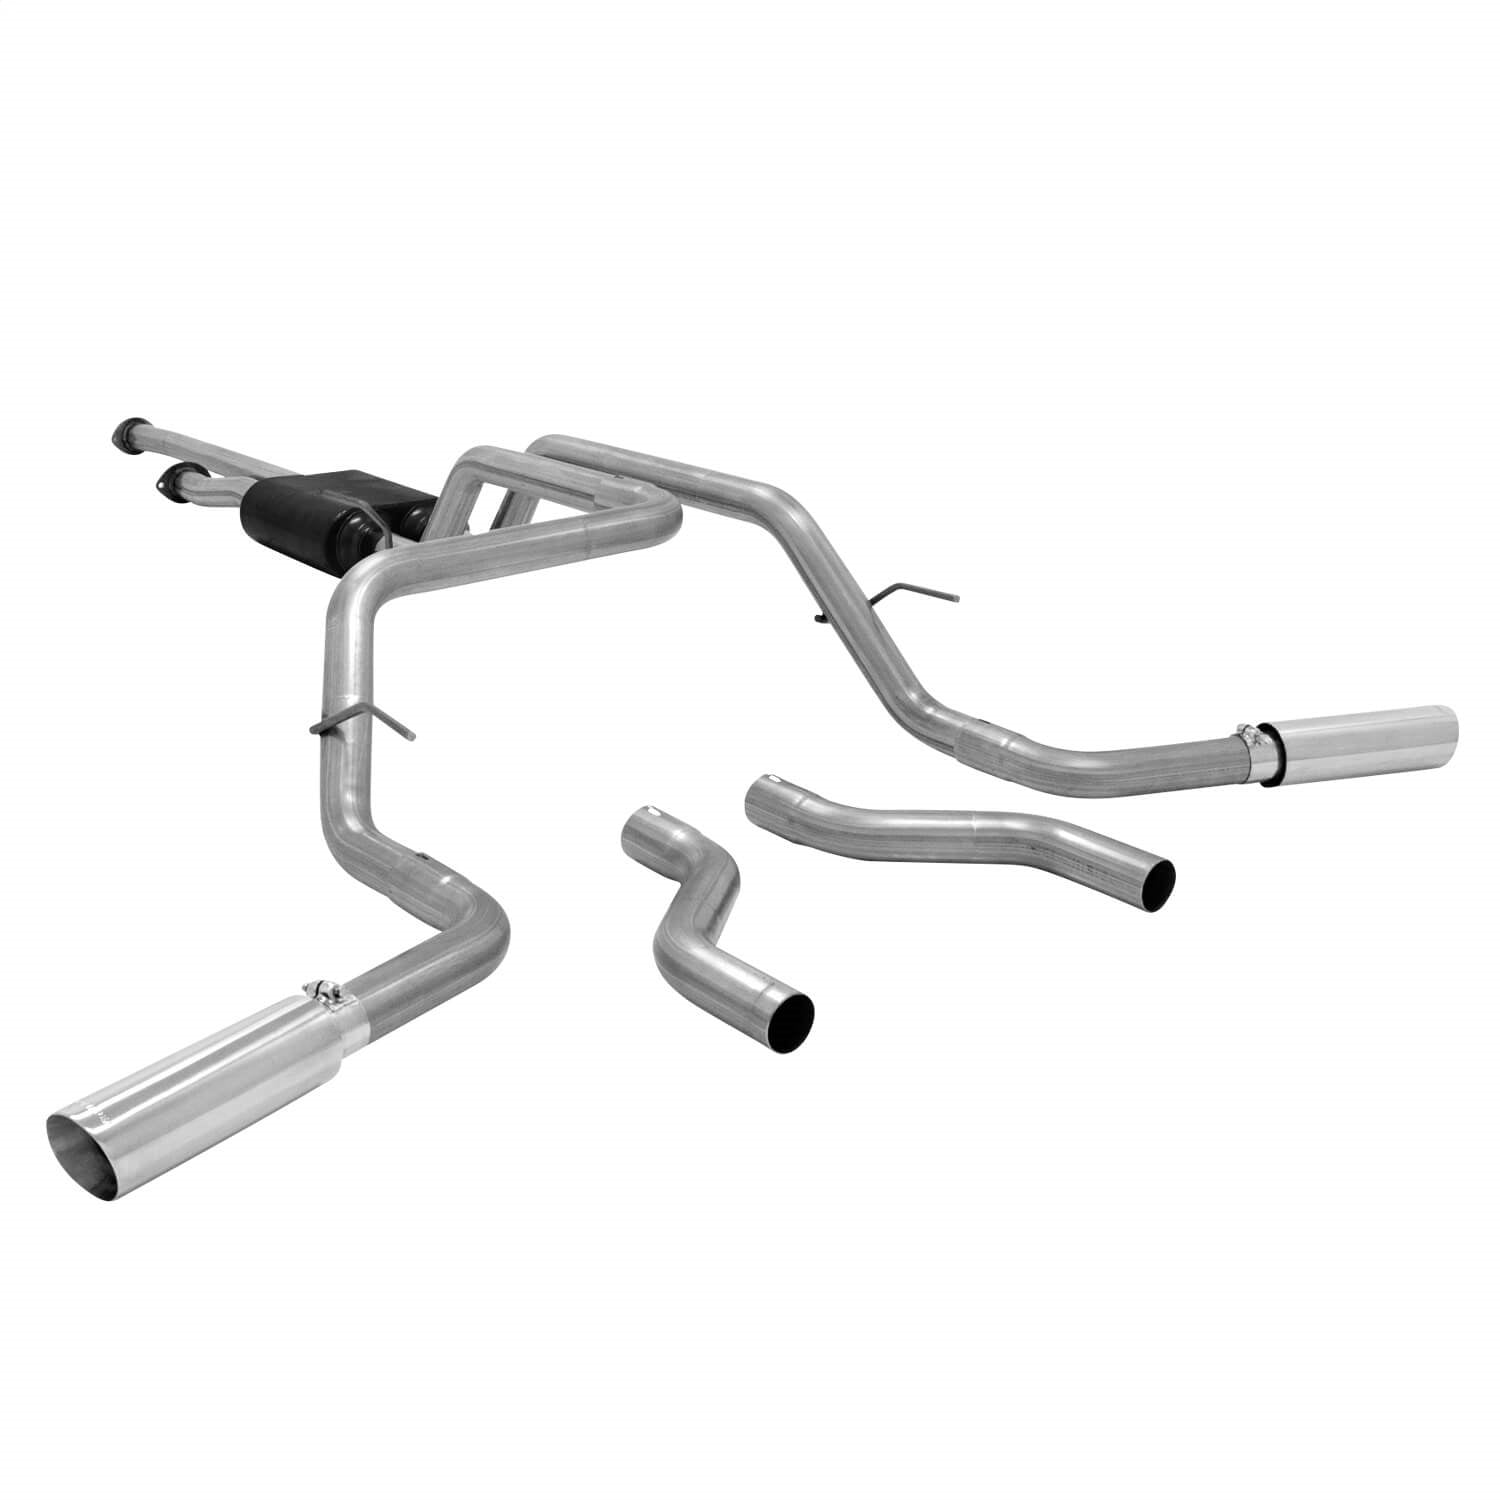 Flowmaster 817664 American Thunder Cat Back Exhaust System Fits 10-21 Tundra